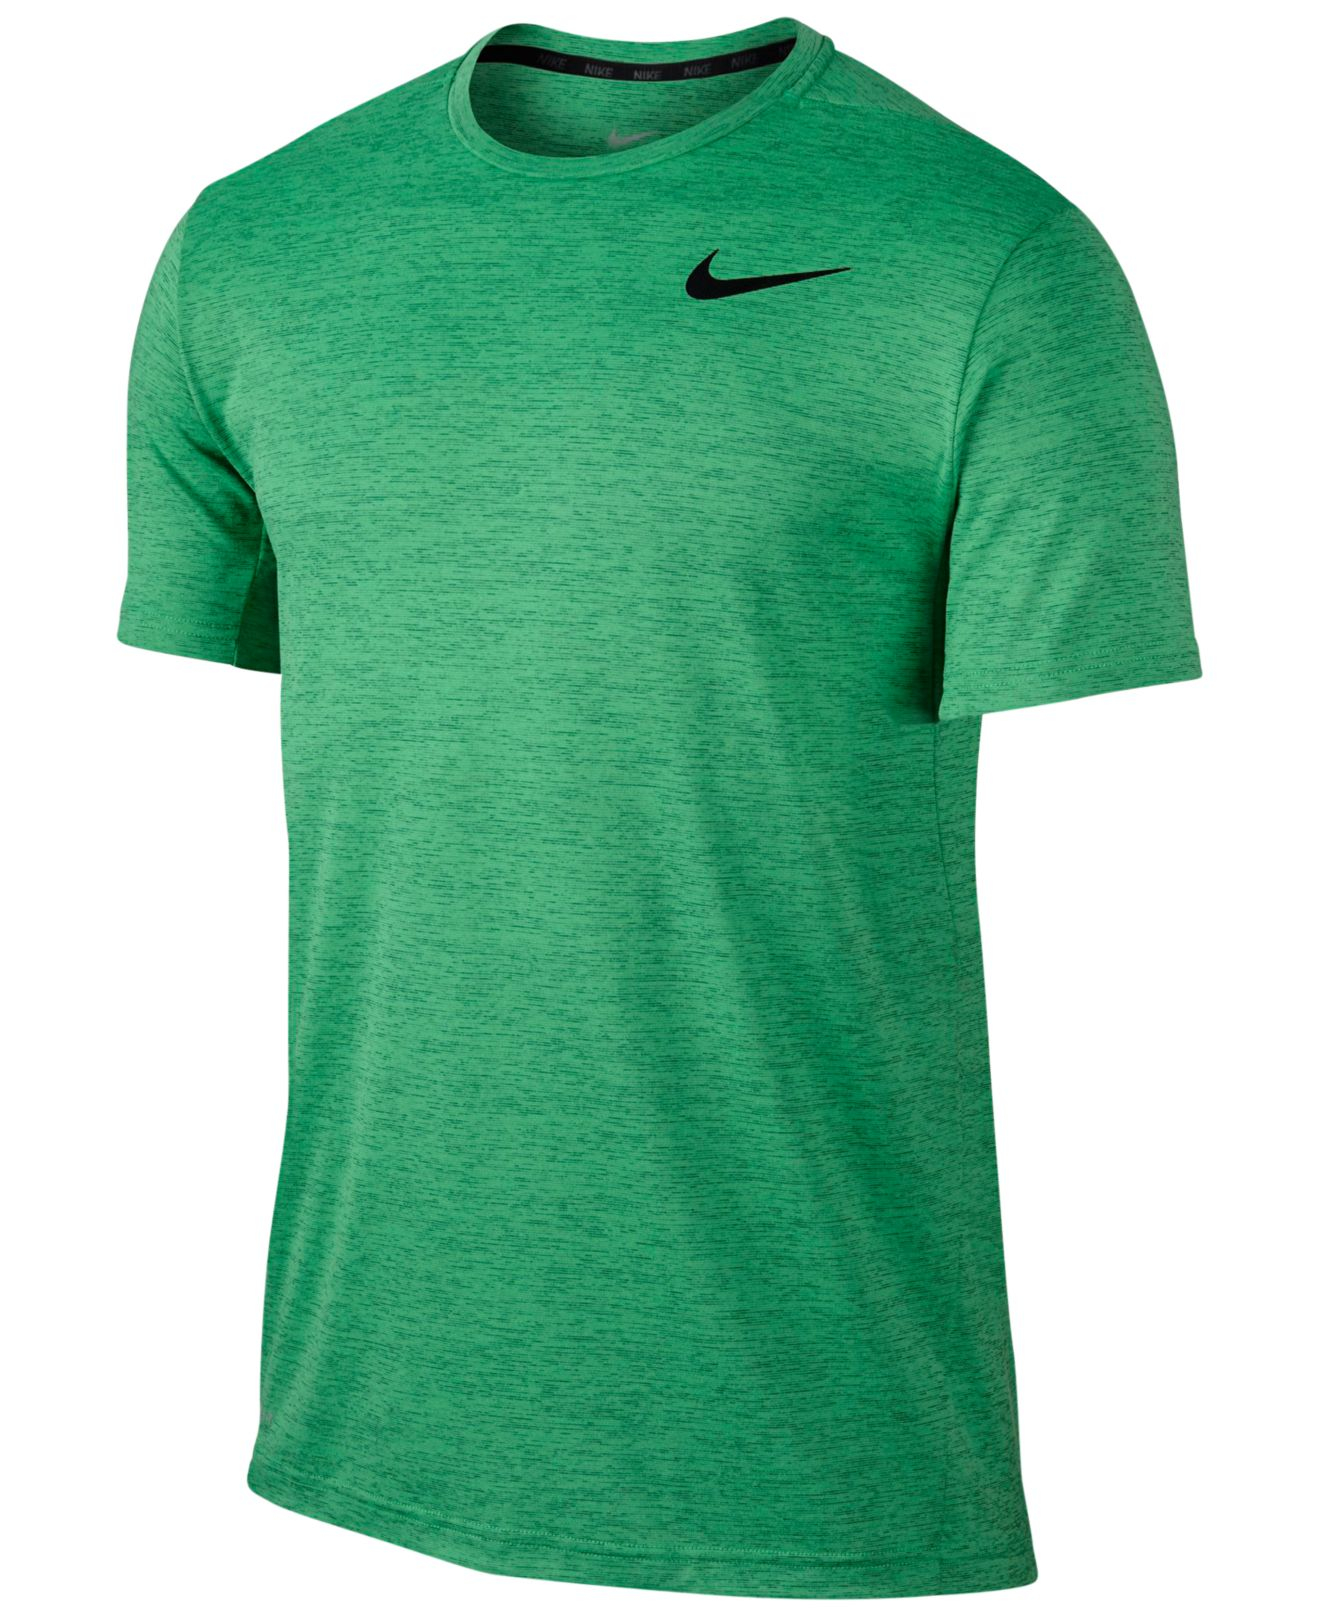 Lyst - Nike Men's Dri-fit Touch Ultra-soft T-shirt in Green for Men